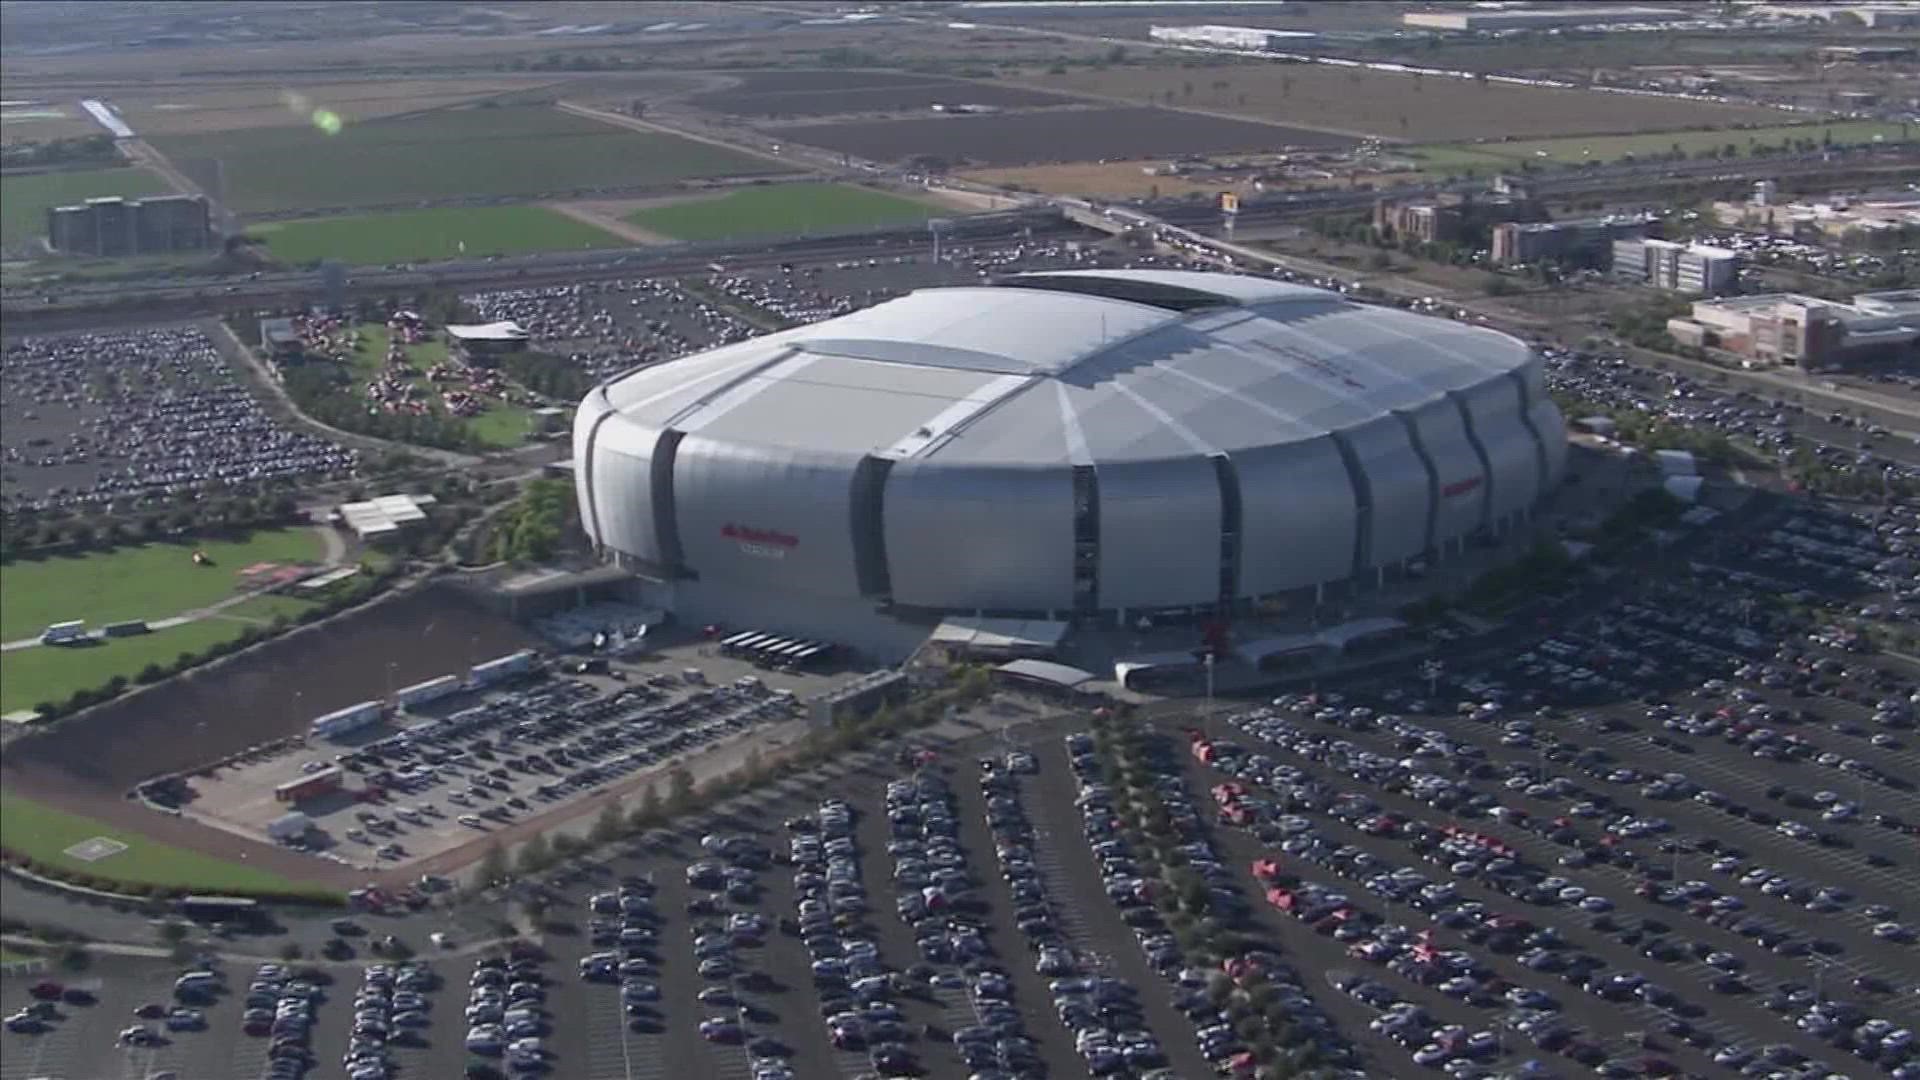 The Committee announced its commitment to reduce the amount of waste produced at the annual event, aiming to have the cleanest Super Bowl in history.